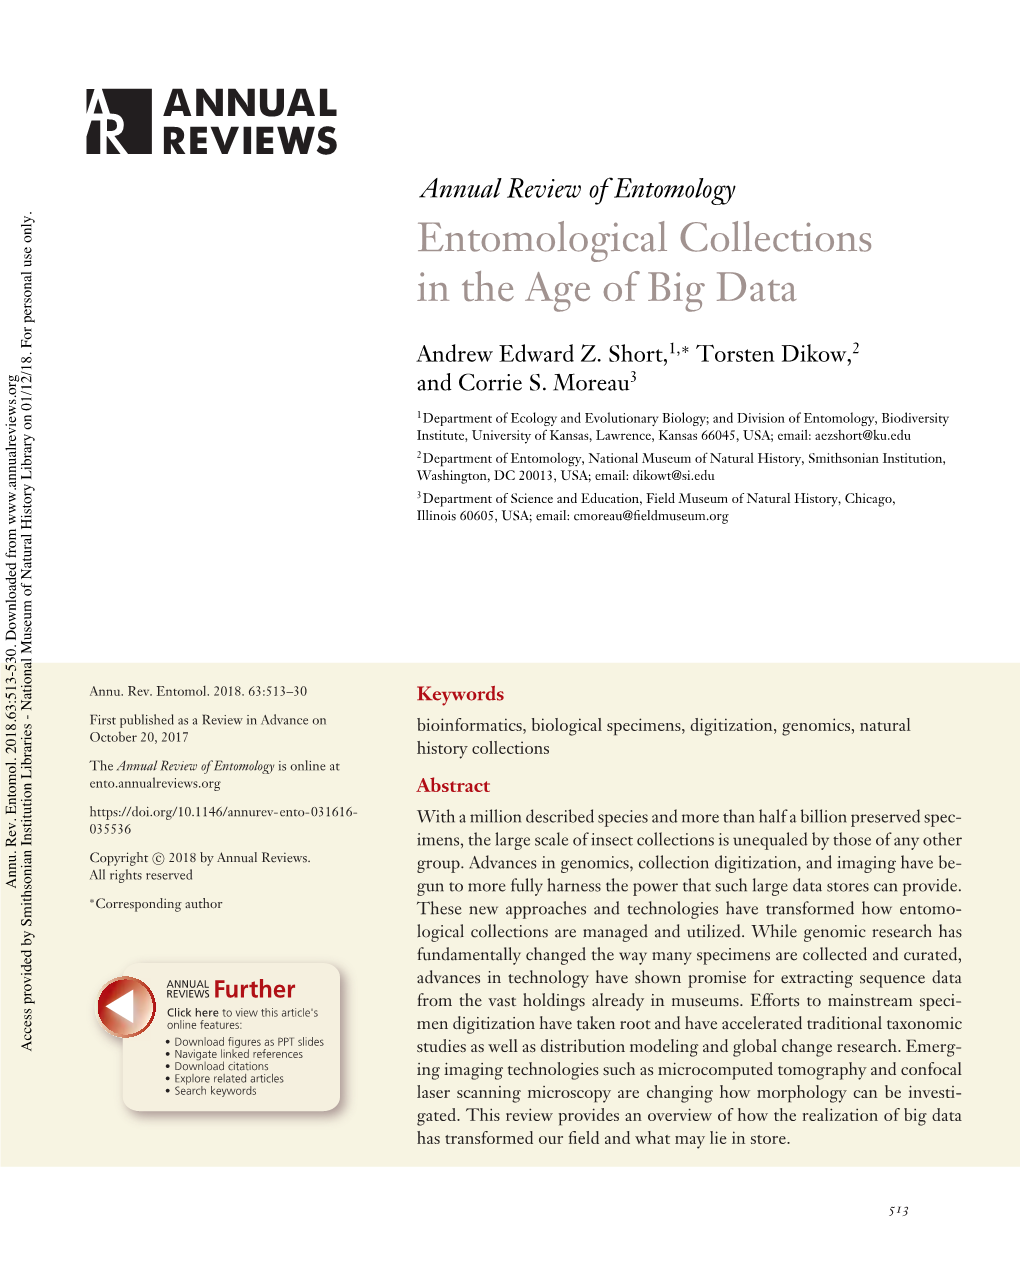 Entomological Collections in the Age of Big Data